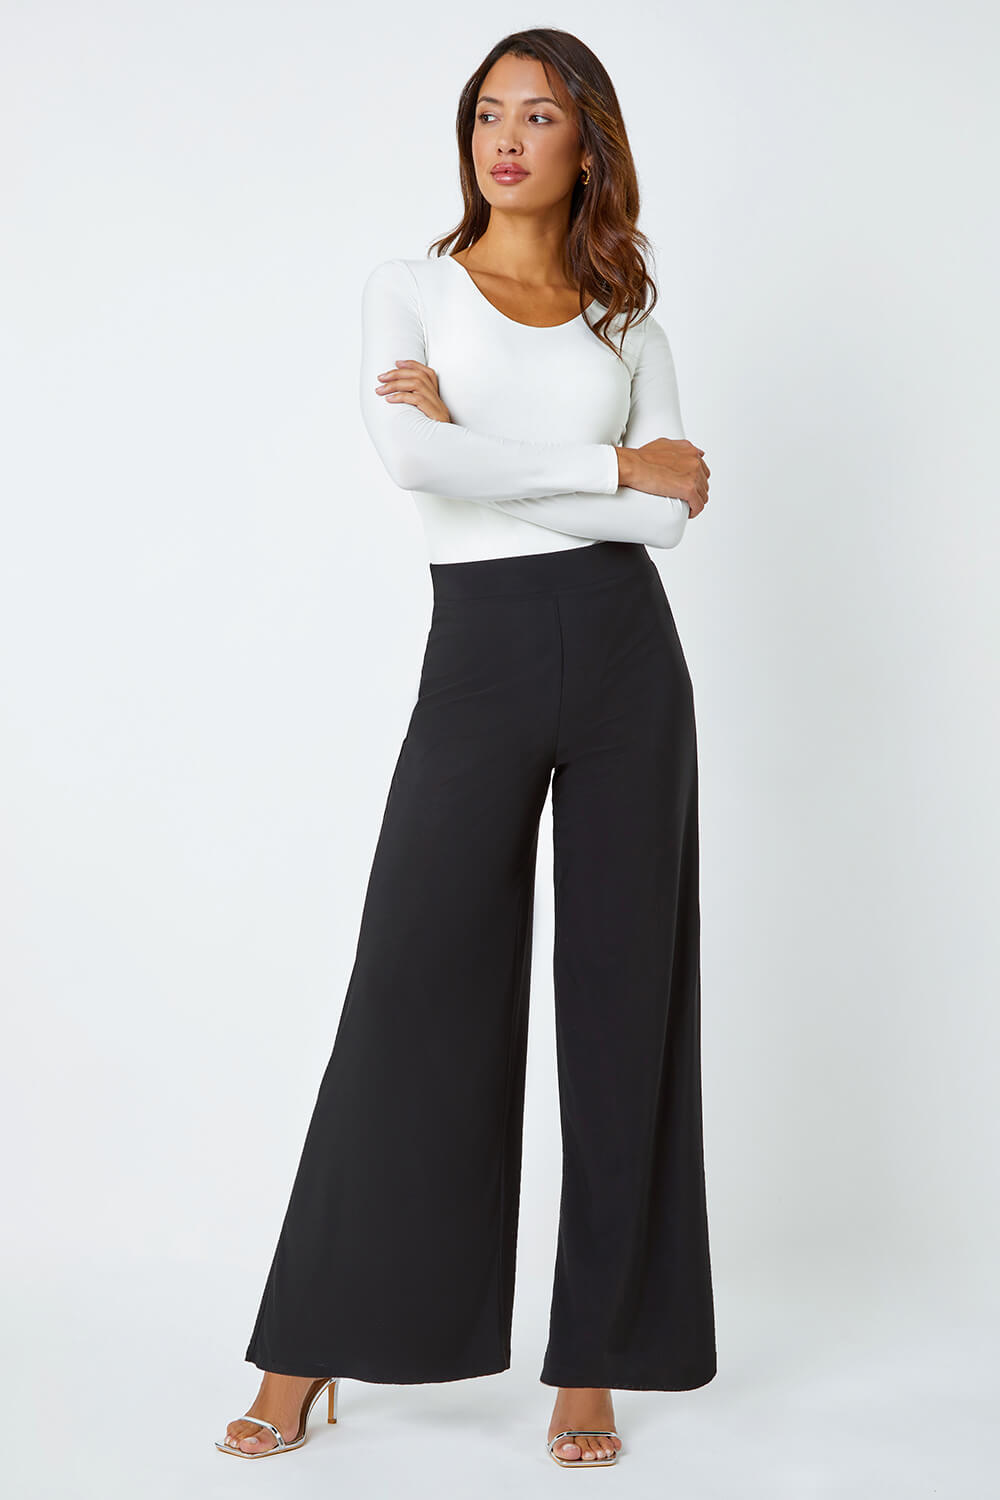 Ruched High Waist Pleated Wide-Leg Pants in Magenta